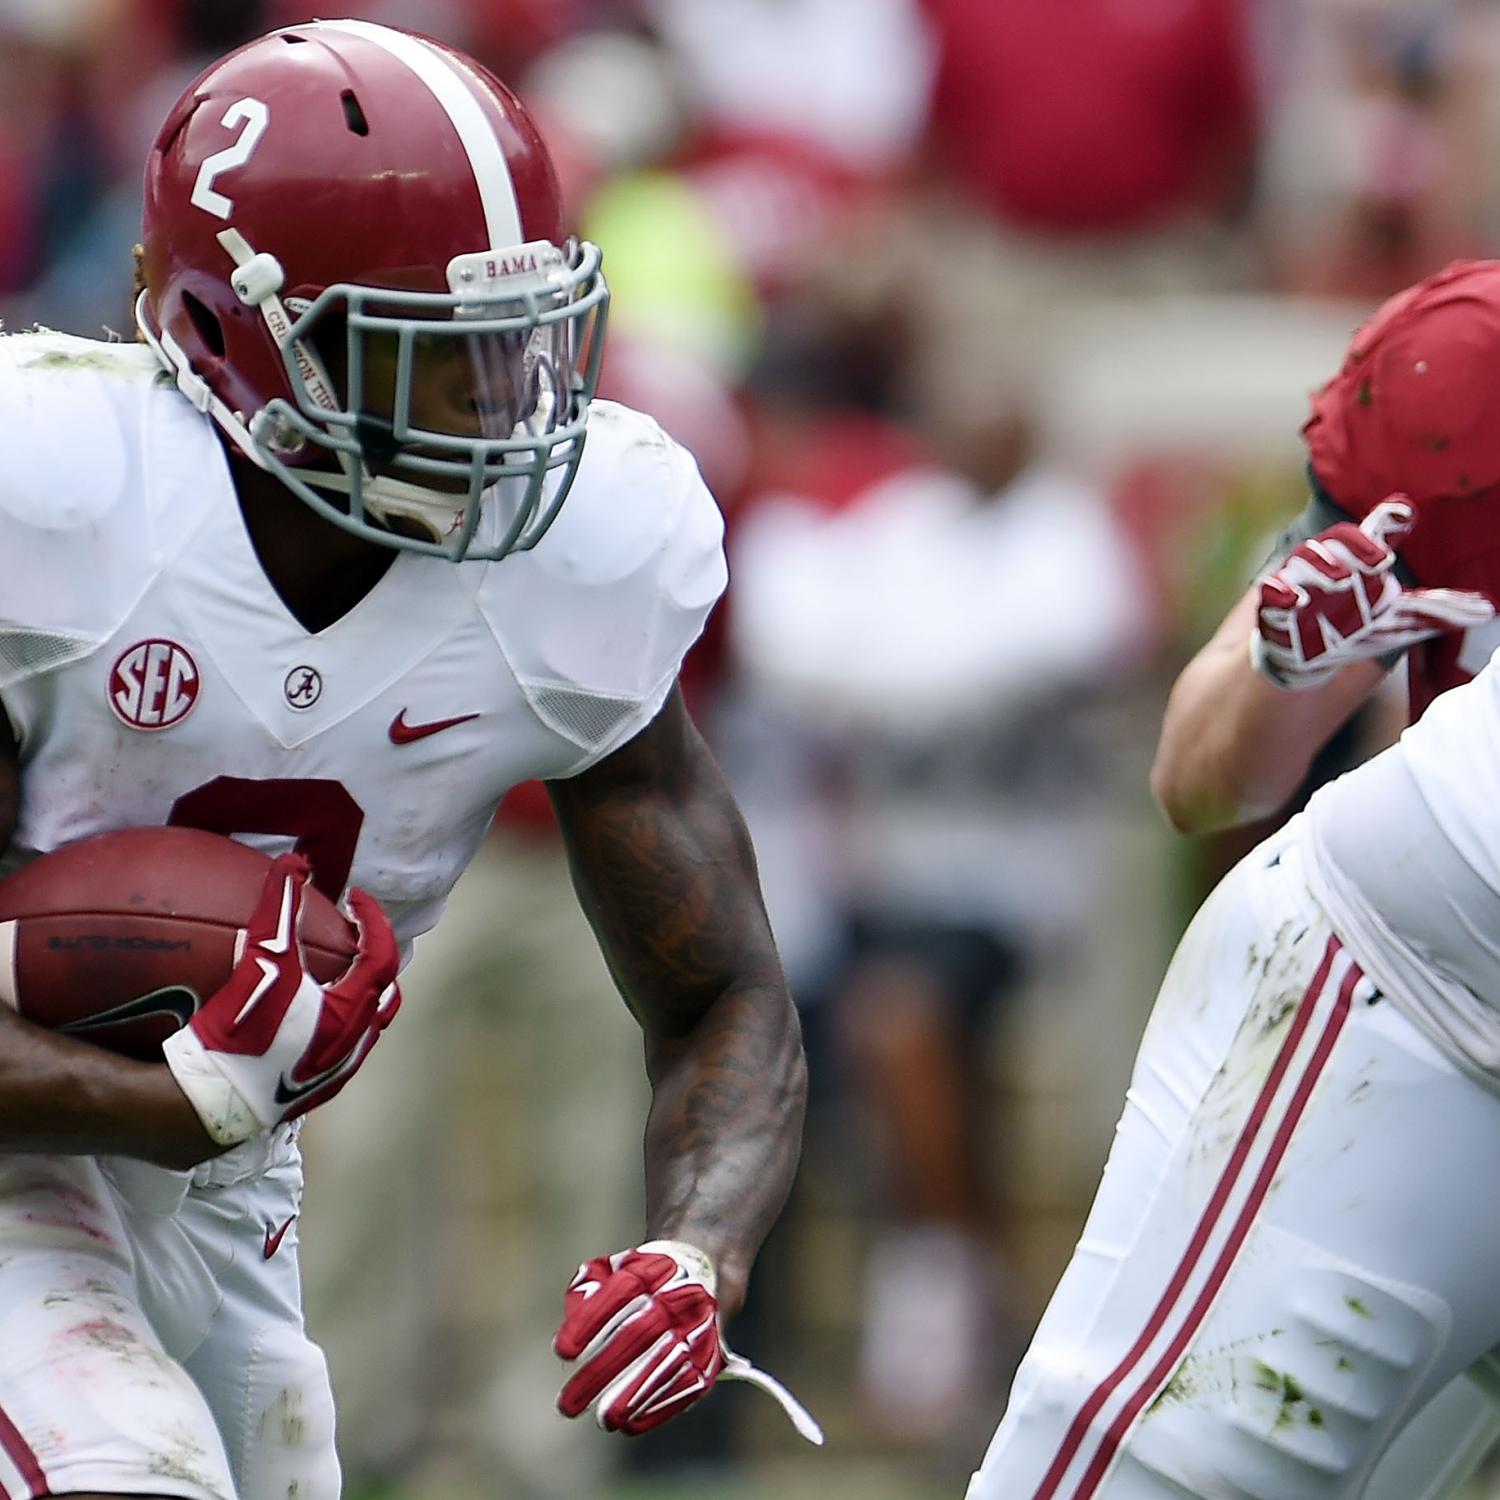 Why Alabama Rb Derrick Henry Will Lead The Sec In Rushing